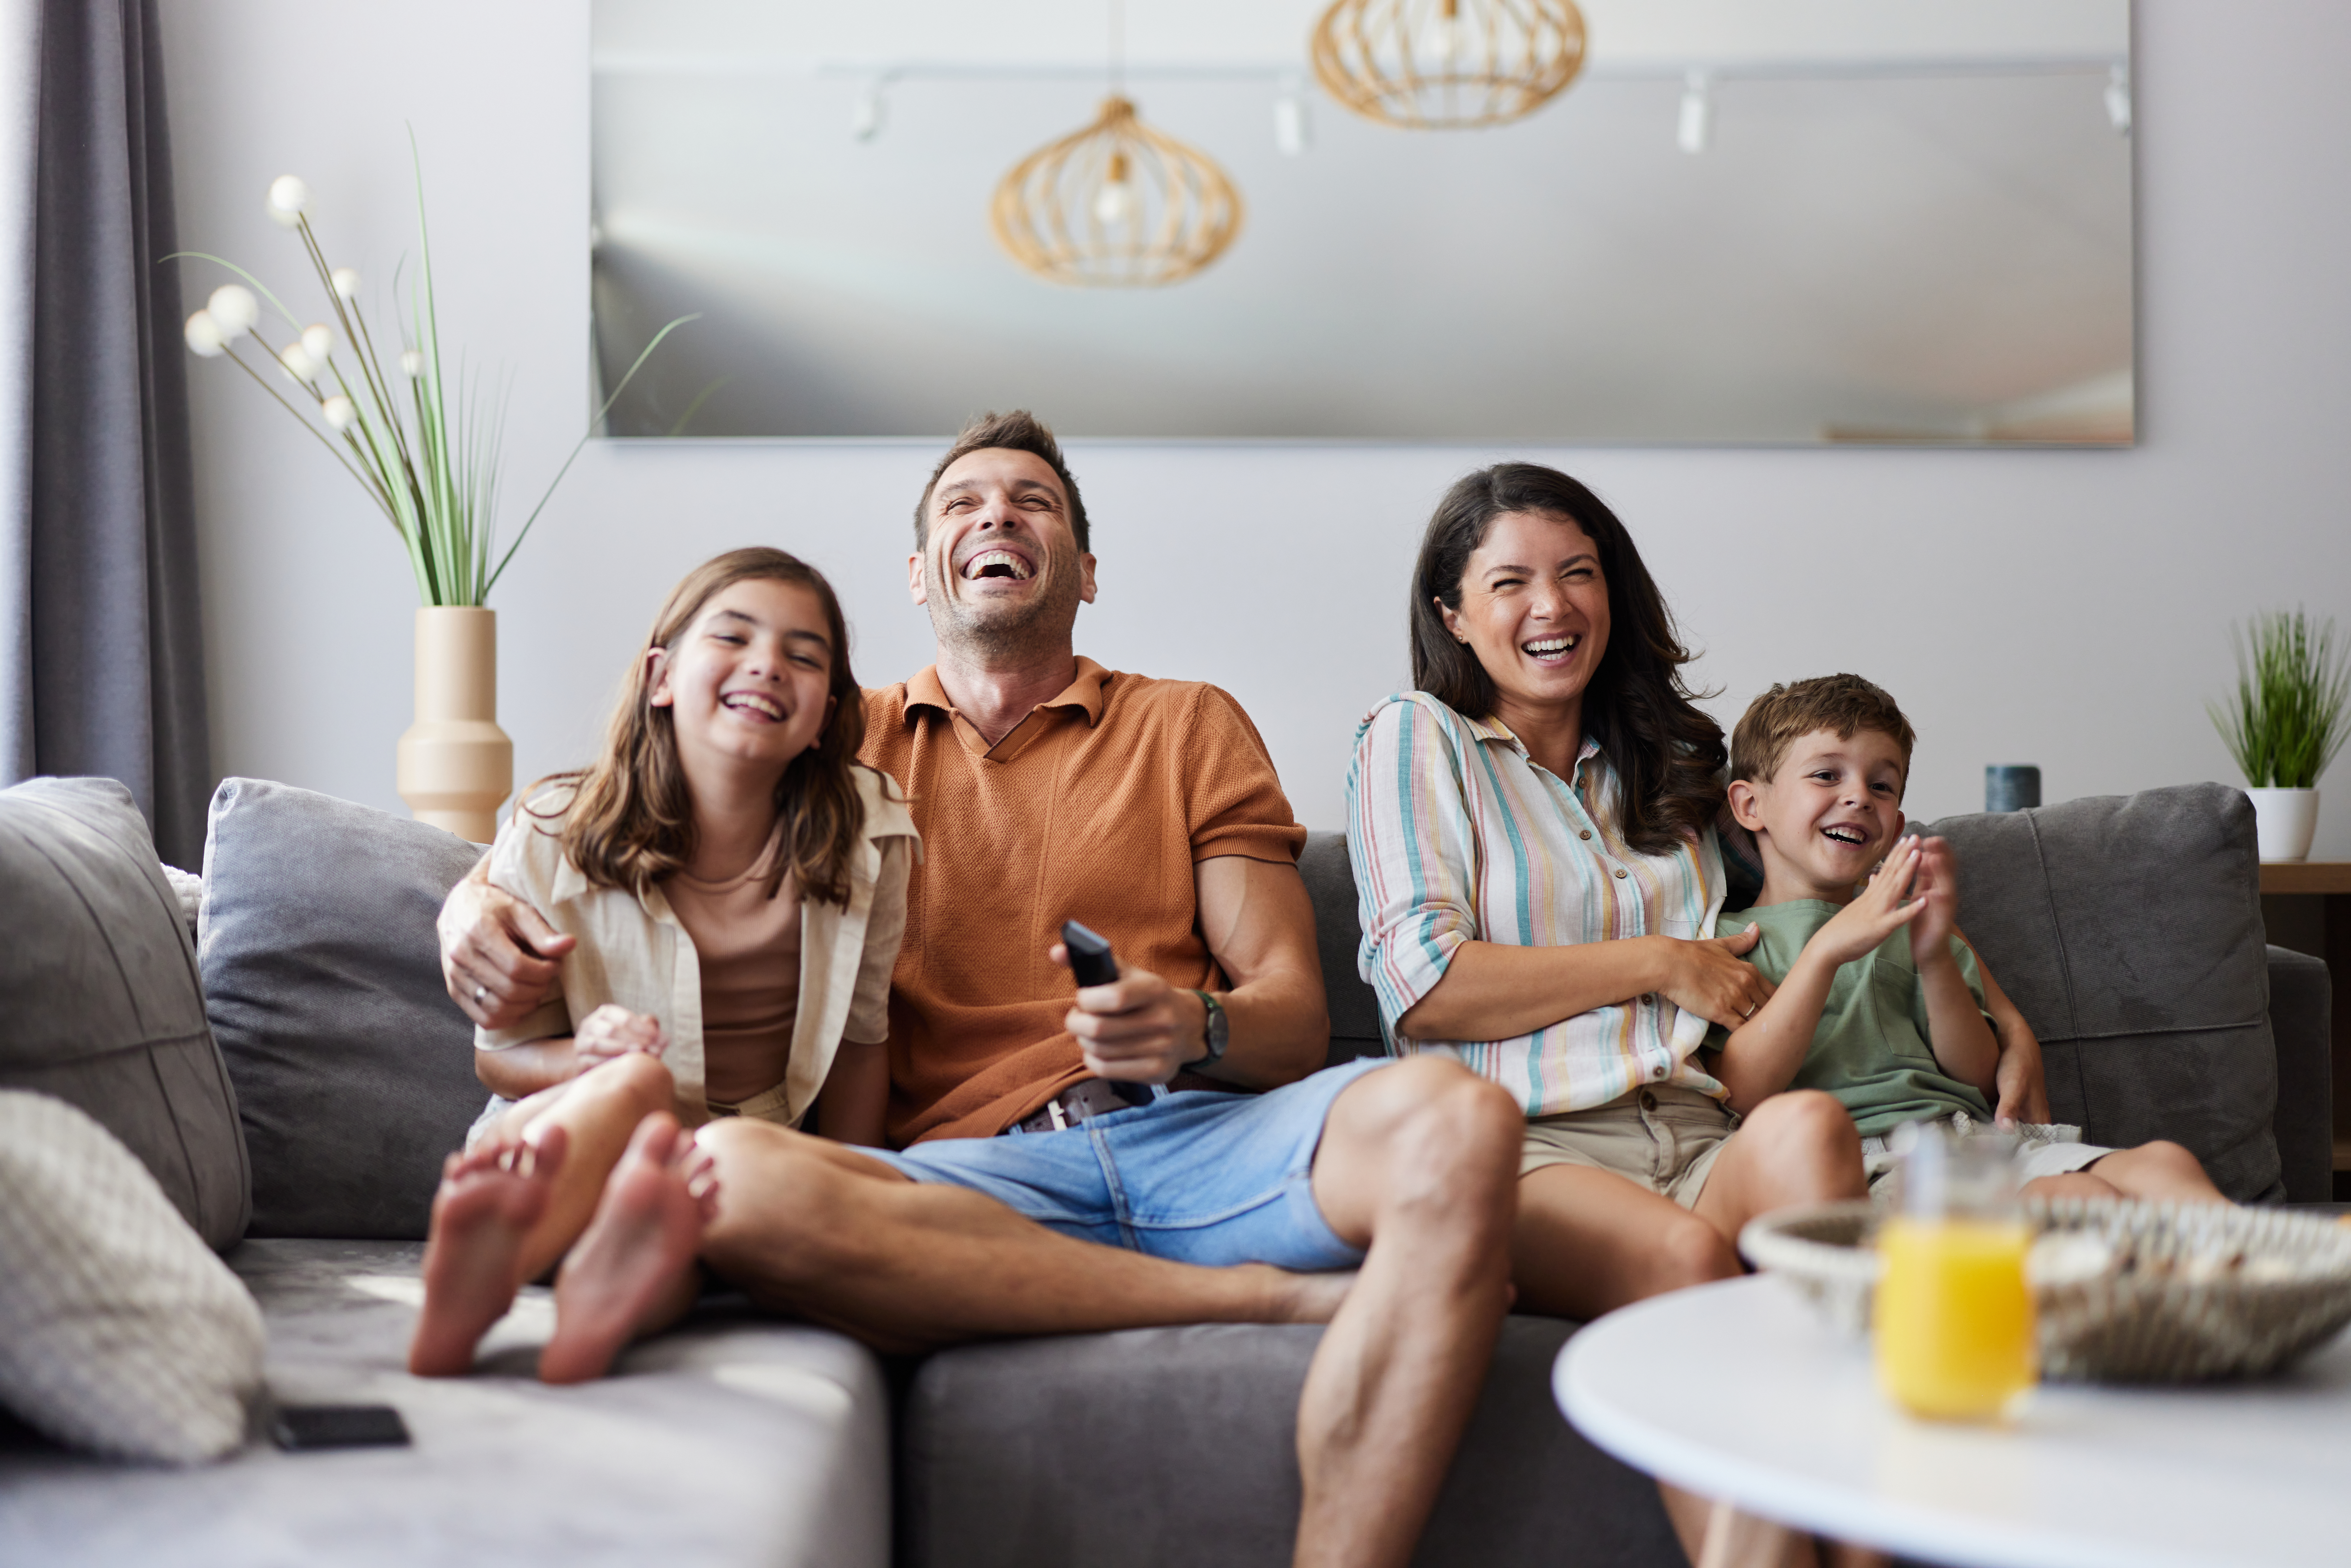 Cheerful parents and their kids having fun while watching a movie on sofa in the living room.